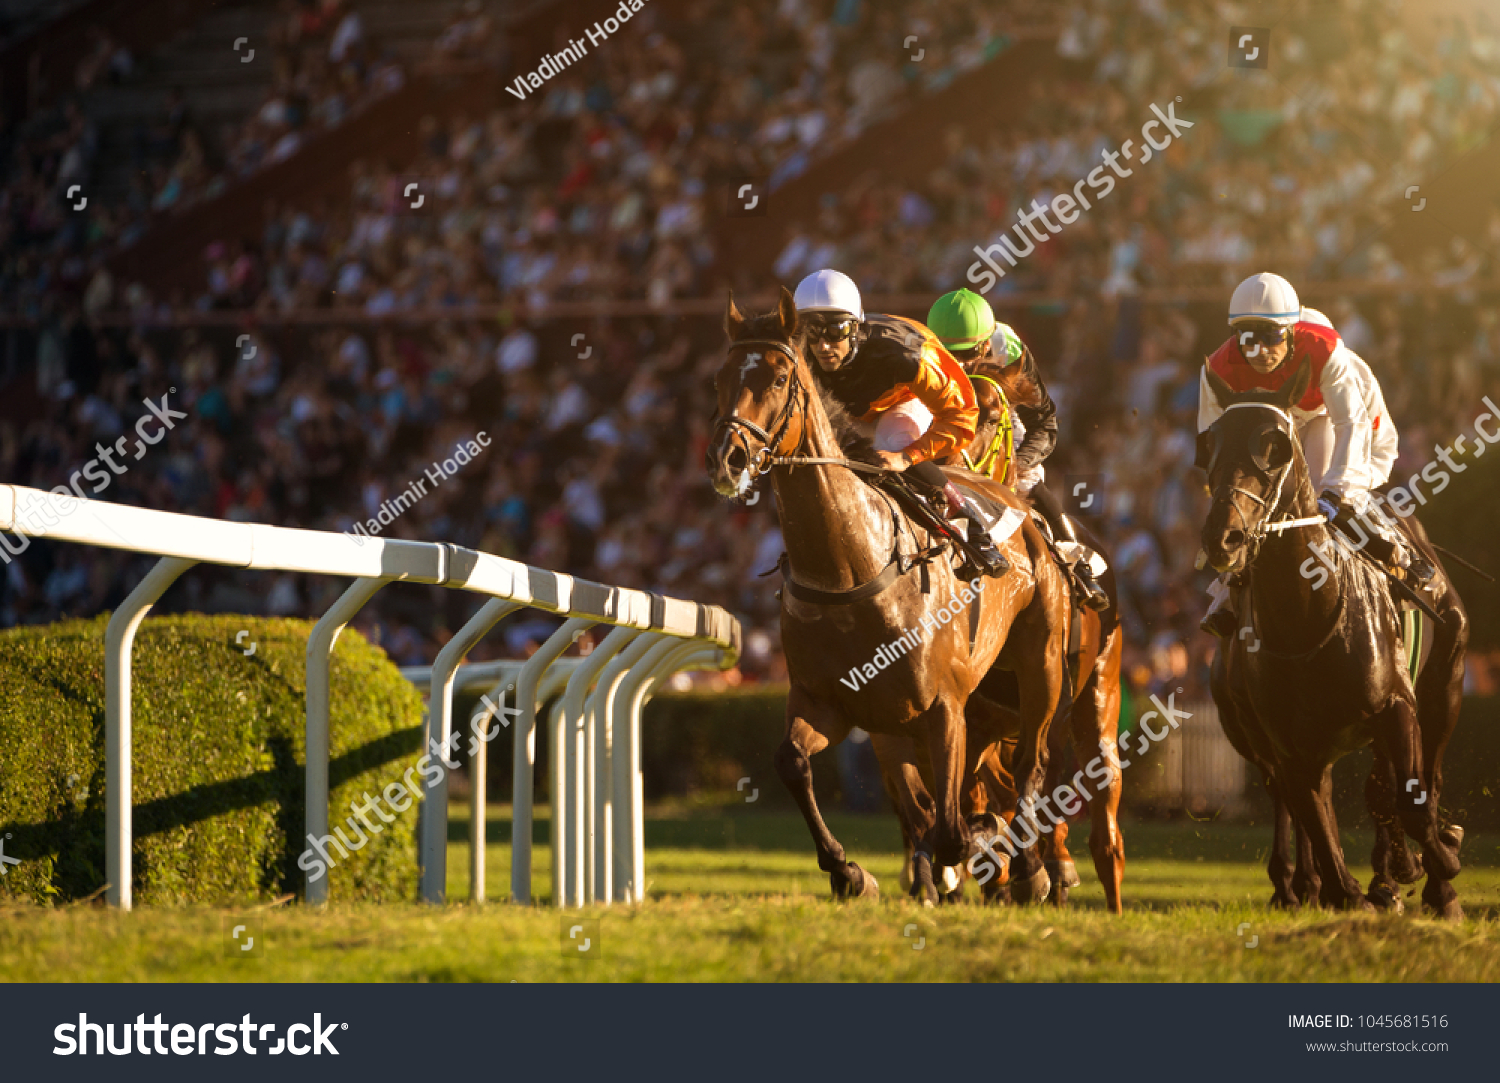 Two jockeys during horse races on his horses going towards finish line. Traditional European sport. #1045681516